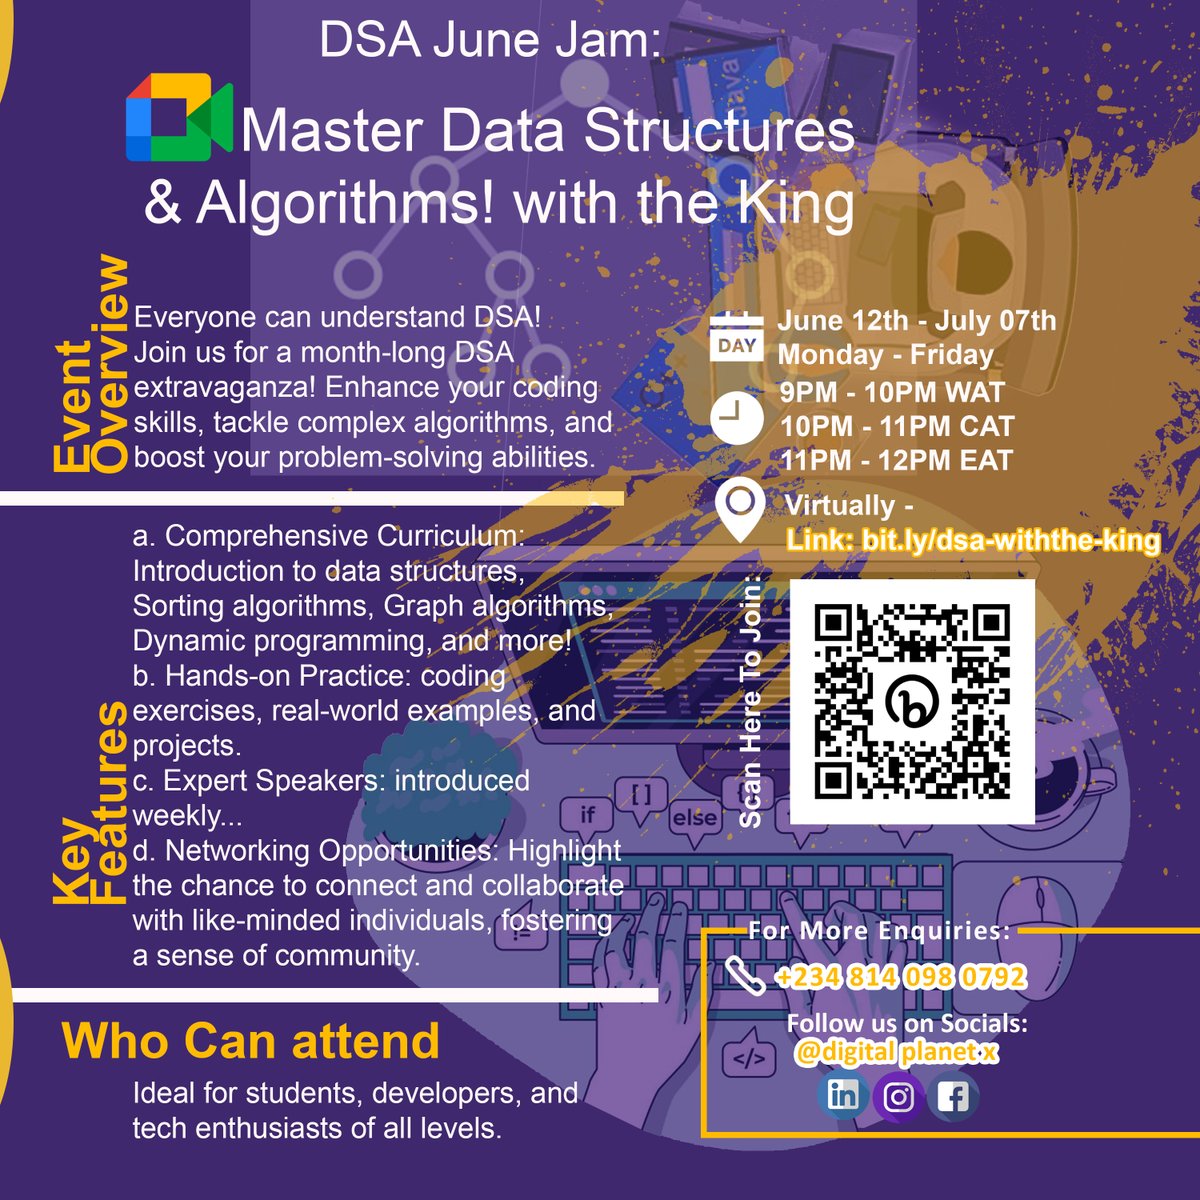 Digital Planet X is hosting Master Data Structures and Algorithms with the King!. Would you like to attend? linkedin.com/events/masterd… 

#DataStructure #Algorithm #TechEvent #LearningDSA #Programming #Coding #TechCommunity #SoftwareDevelopment #TechEducation #ComputerScience #Tech